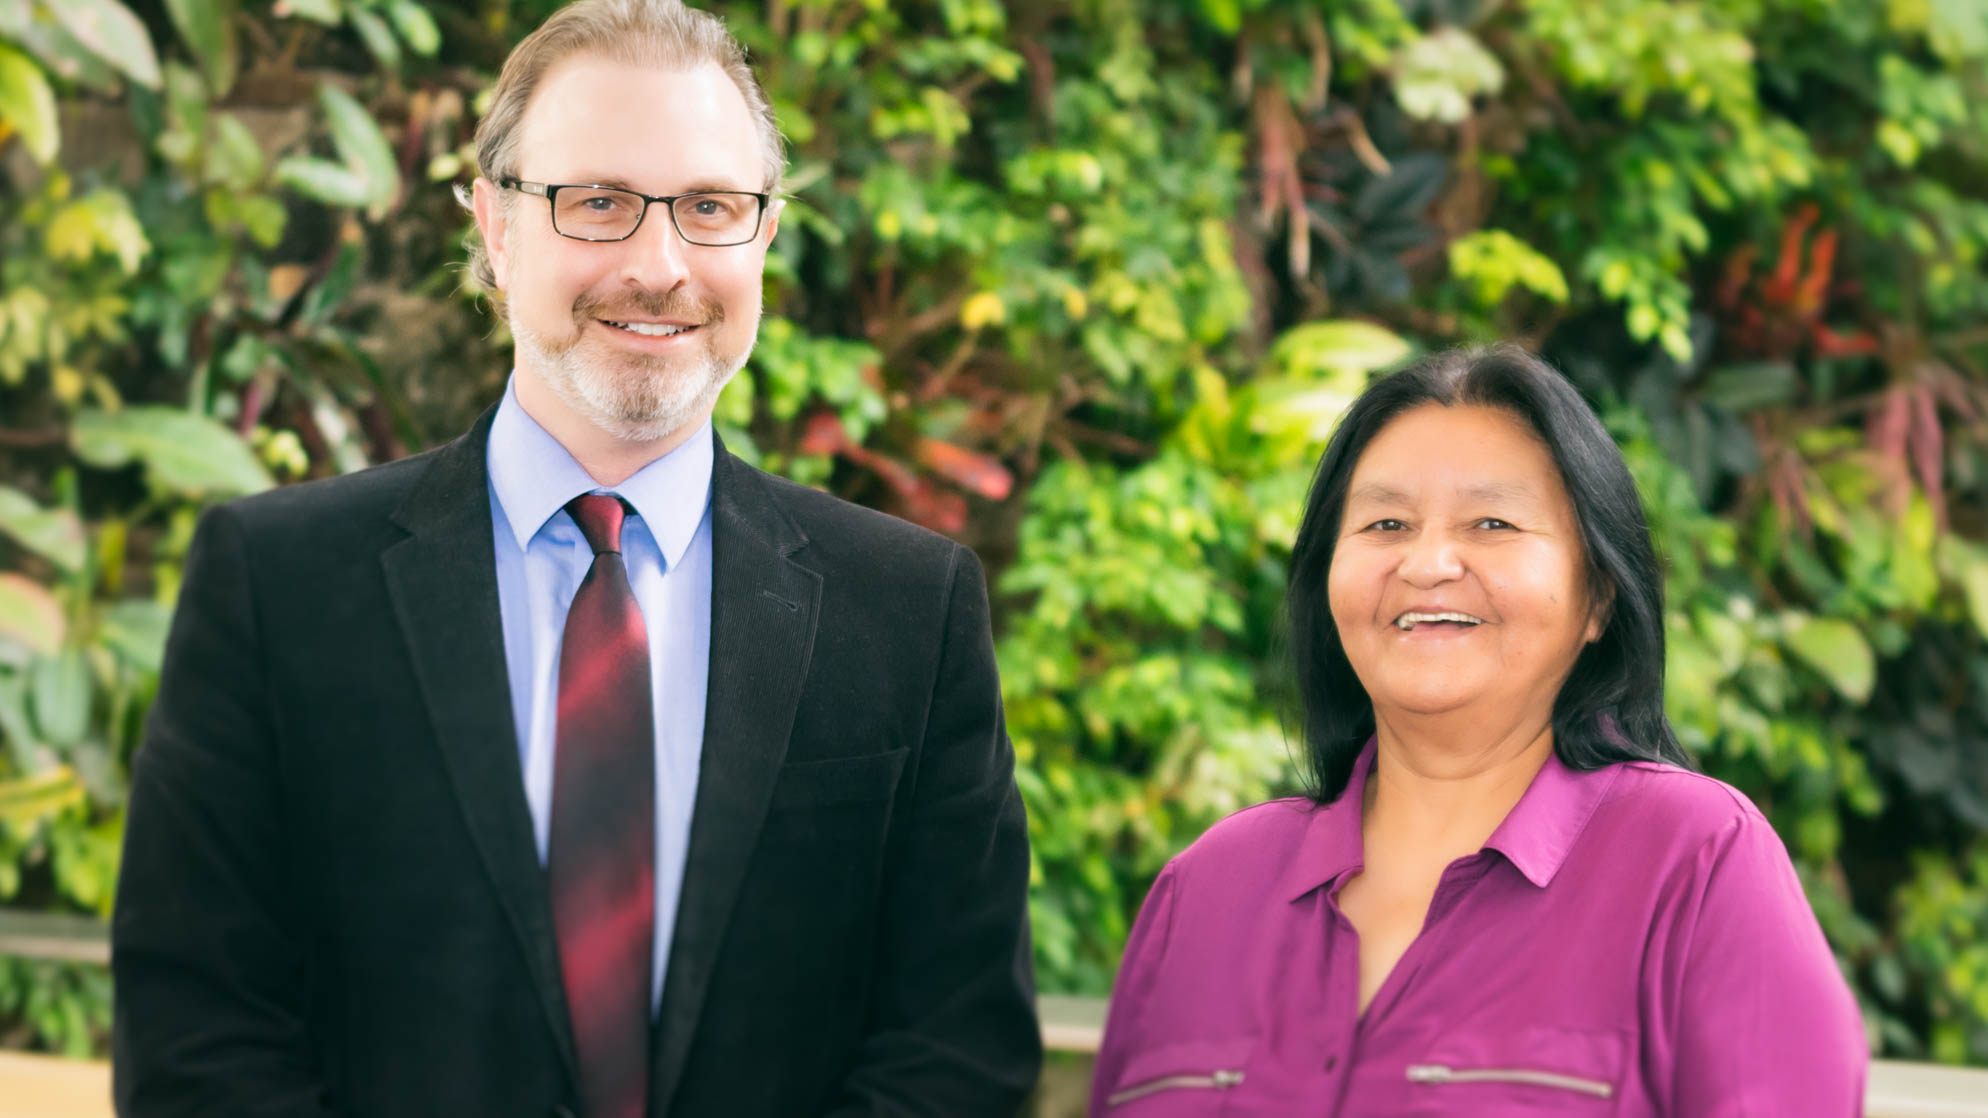 Arlene Faries (left) stands with Dr. David Danto, Program Head of Psychology in front of the UofGH Plant Wall